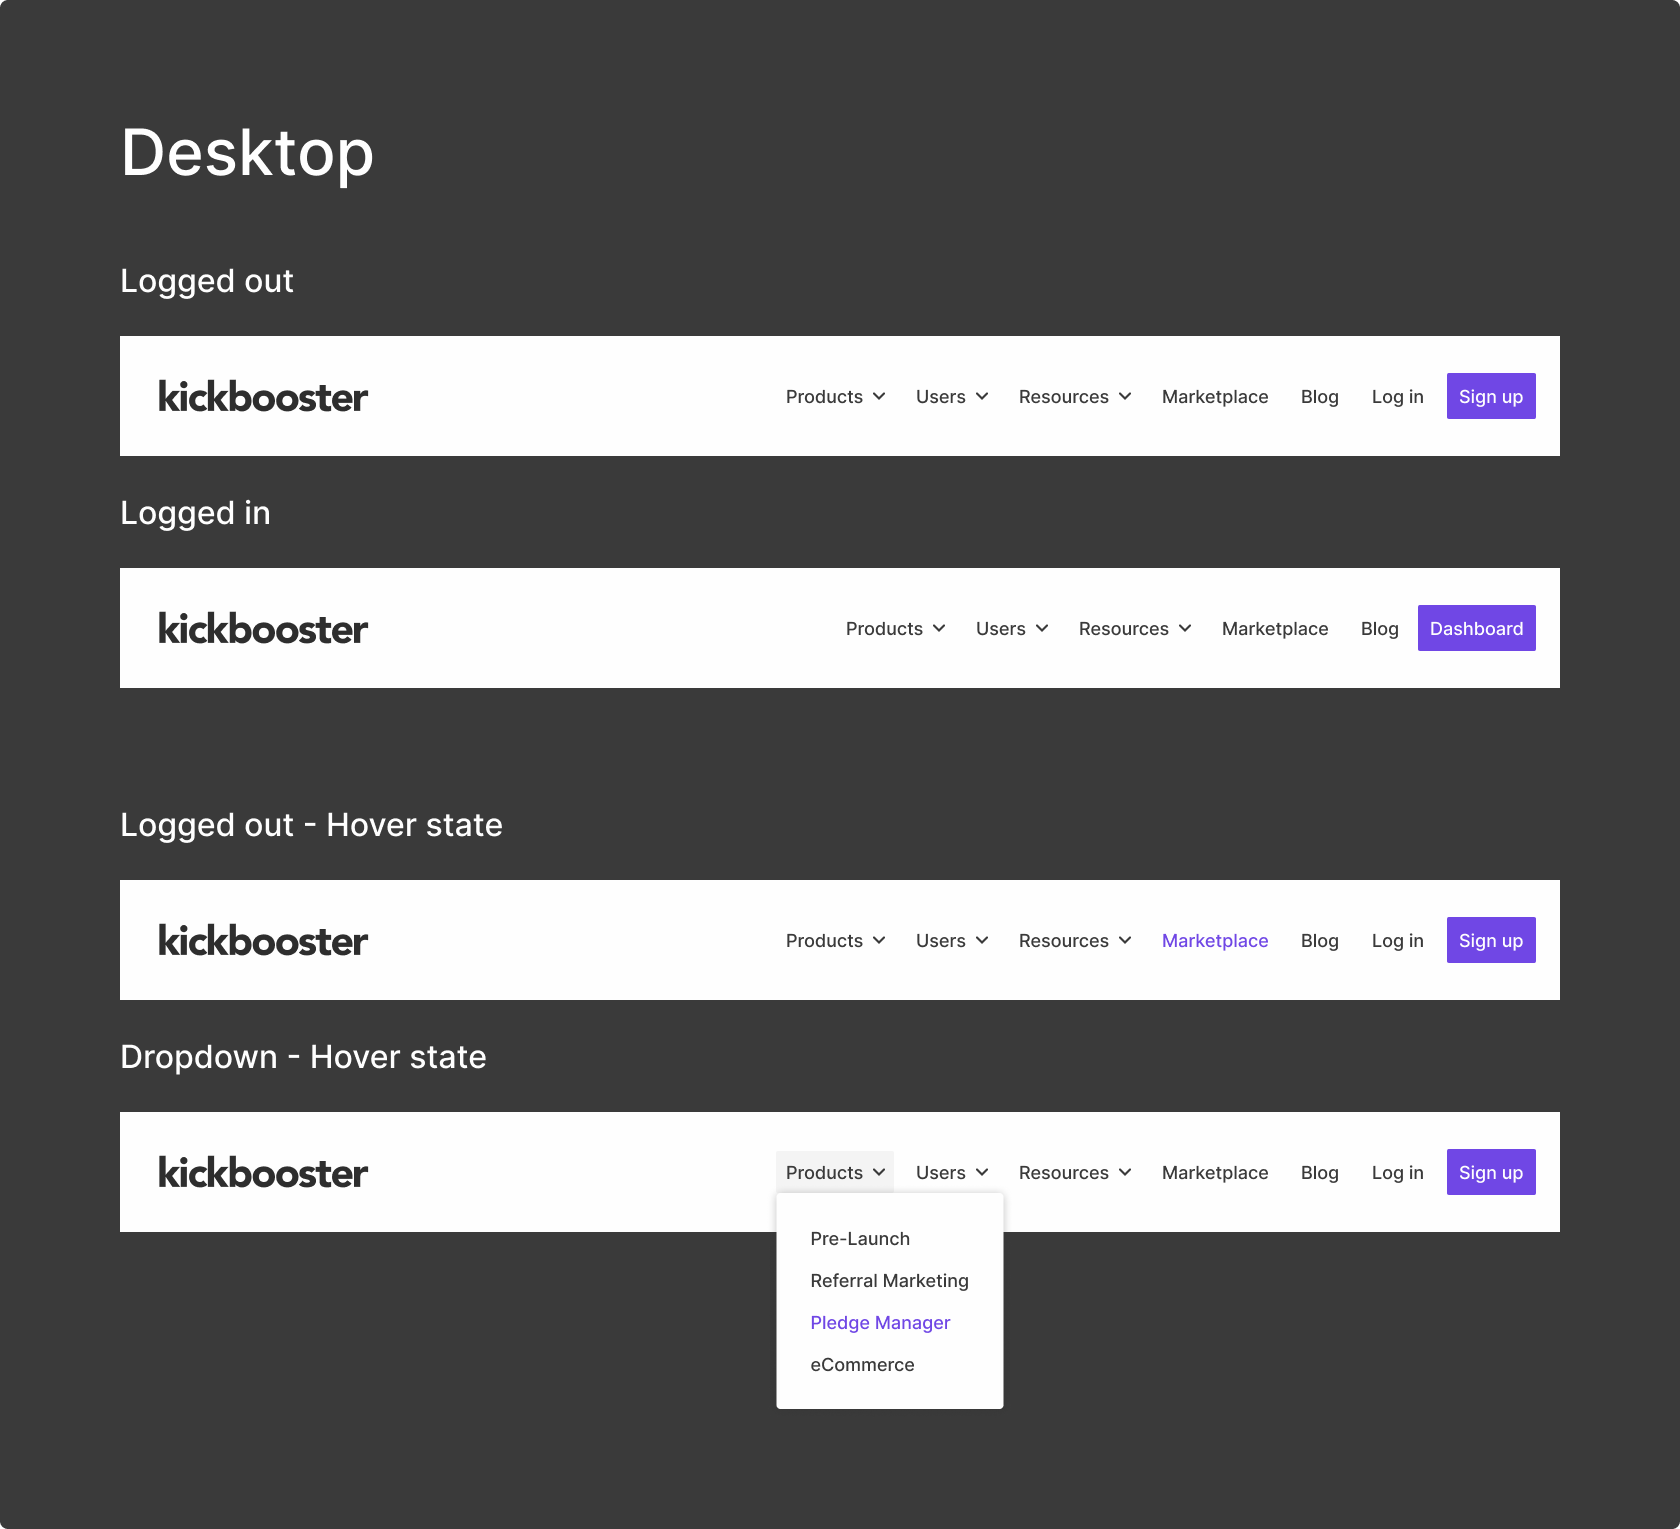 Sample from the design system: Navigation components